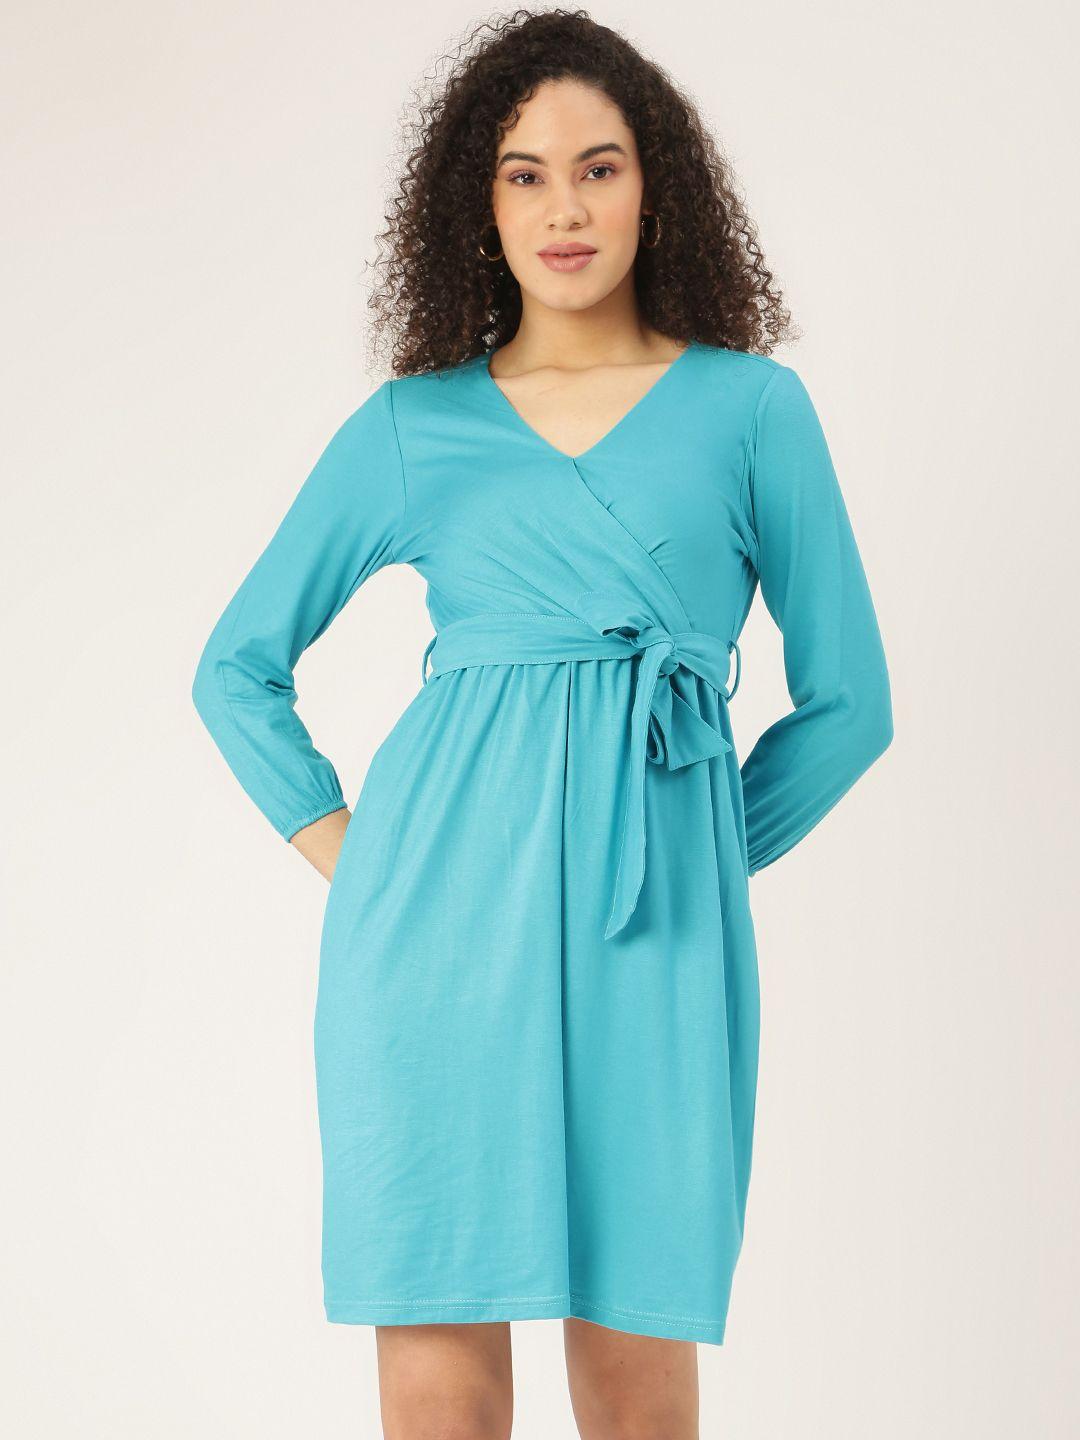 brinns turquoise blue solid dress